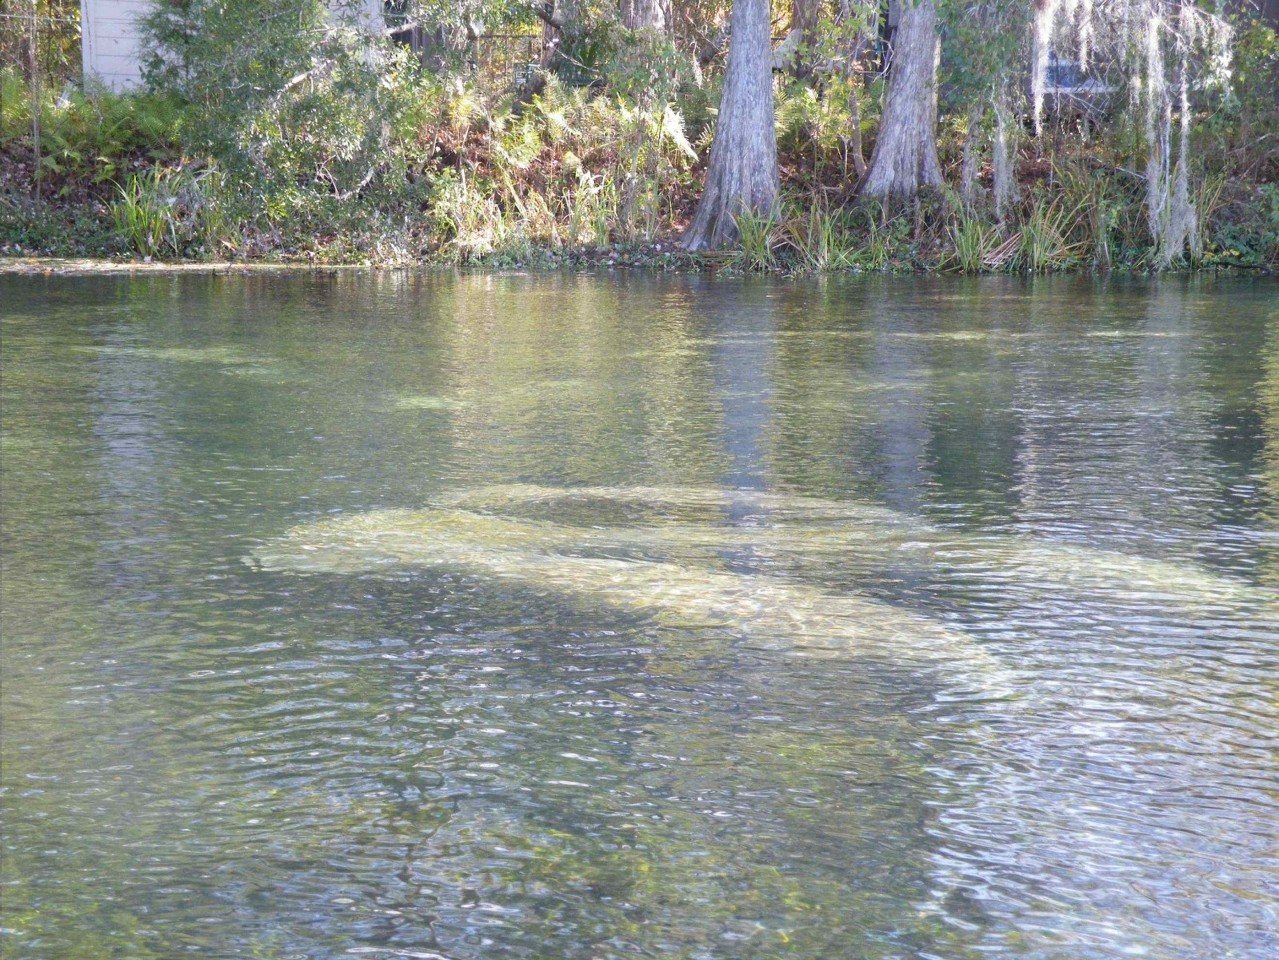 This photo is decorative and has nothing to do with sellers negotiations. It shows the clear wakulla river and several manatees hanging out in the water.